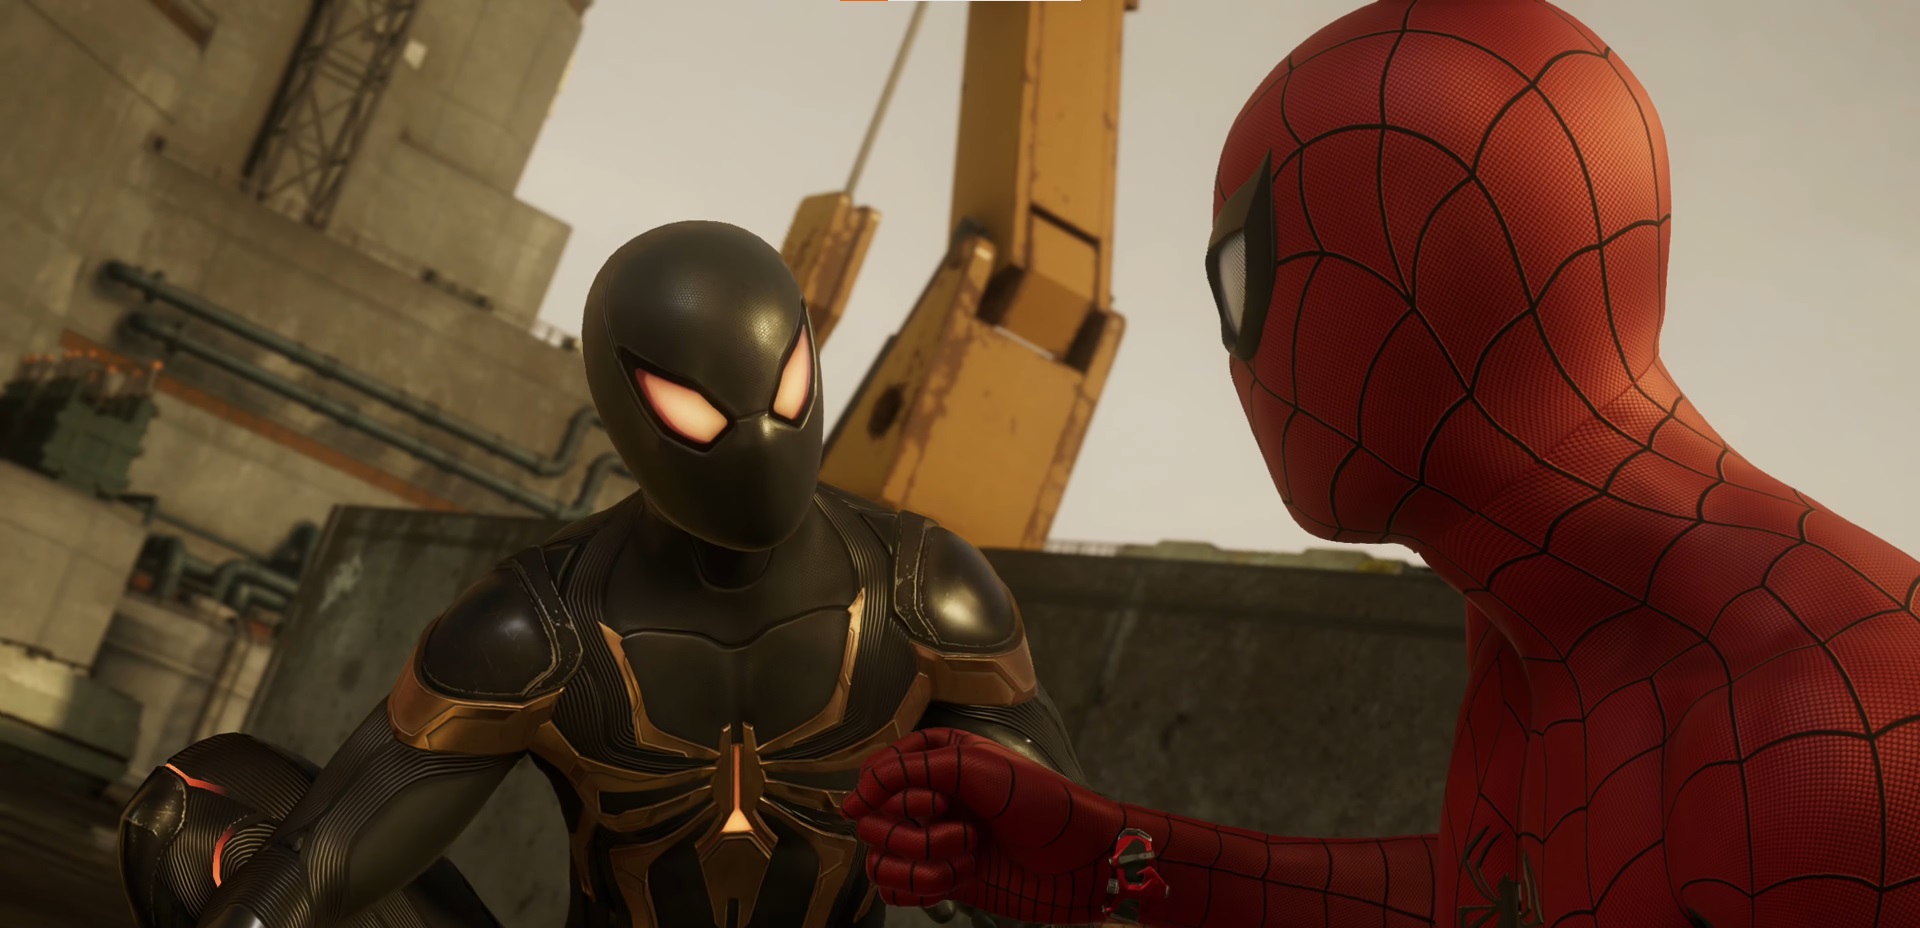 Is Marvel’s Spider-Man 2 coming to Xbox or PC? – Answered